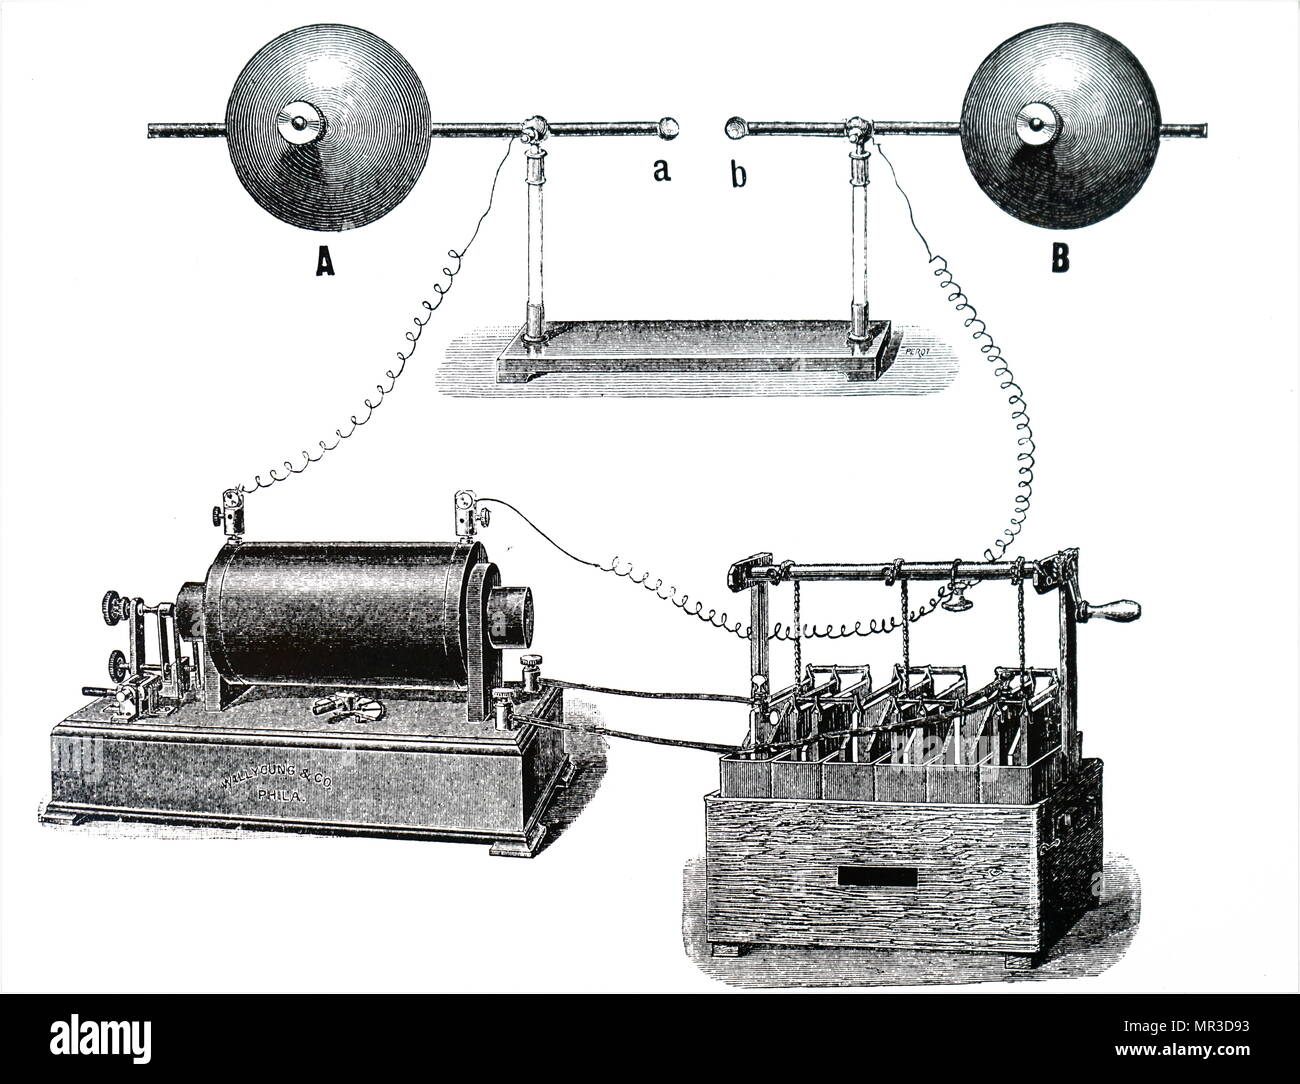 Illustration depicting Heinrich Hertz's oscillator and reflecting metal sheets to show outward and return paths of electromagnetic (radio) waves. Heinrich Hertz (1857-1894) a German physicist who first conclusively proved the existence of the electromagnetic waves theorised by James Clerk Maxwell's electromagnetic theory of light. Dated 20th century Stock Photo